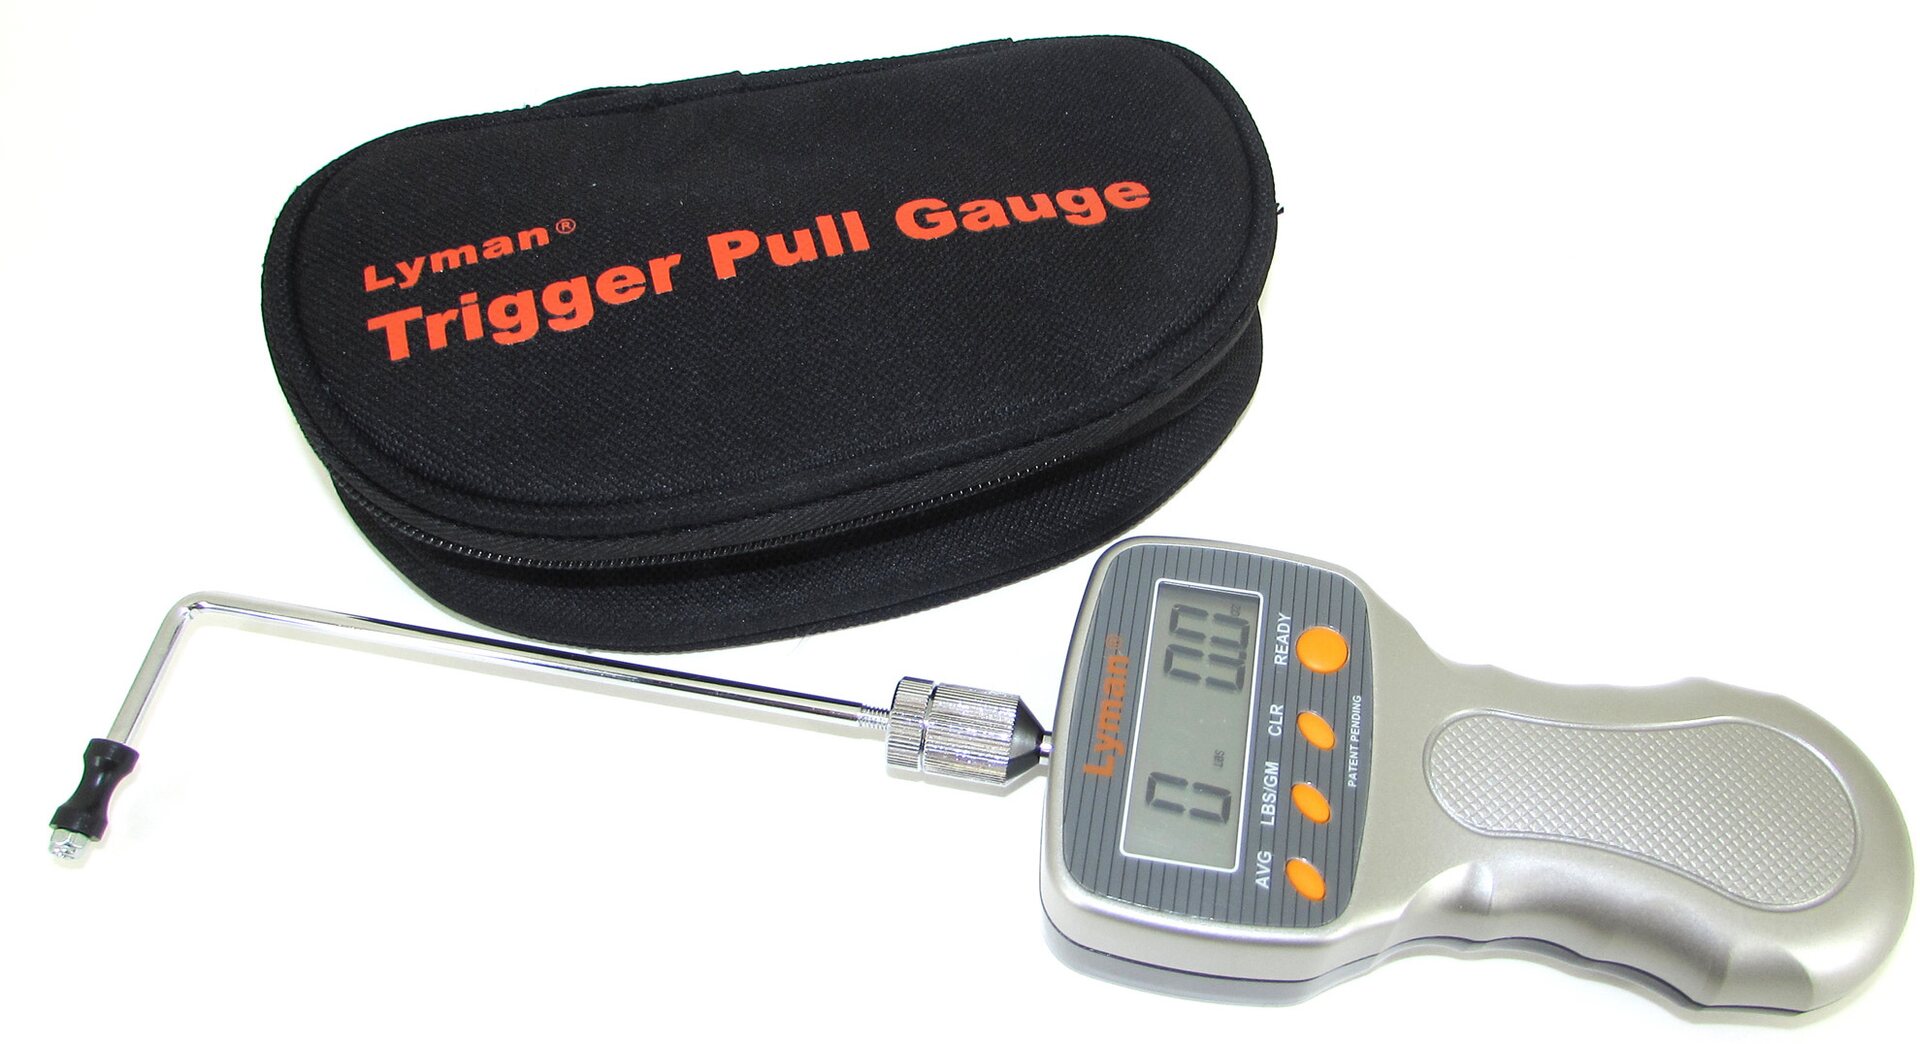 Lyman Trigger Pull Scale, Electronics for professional use